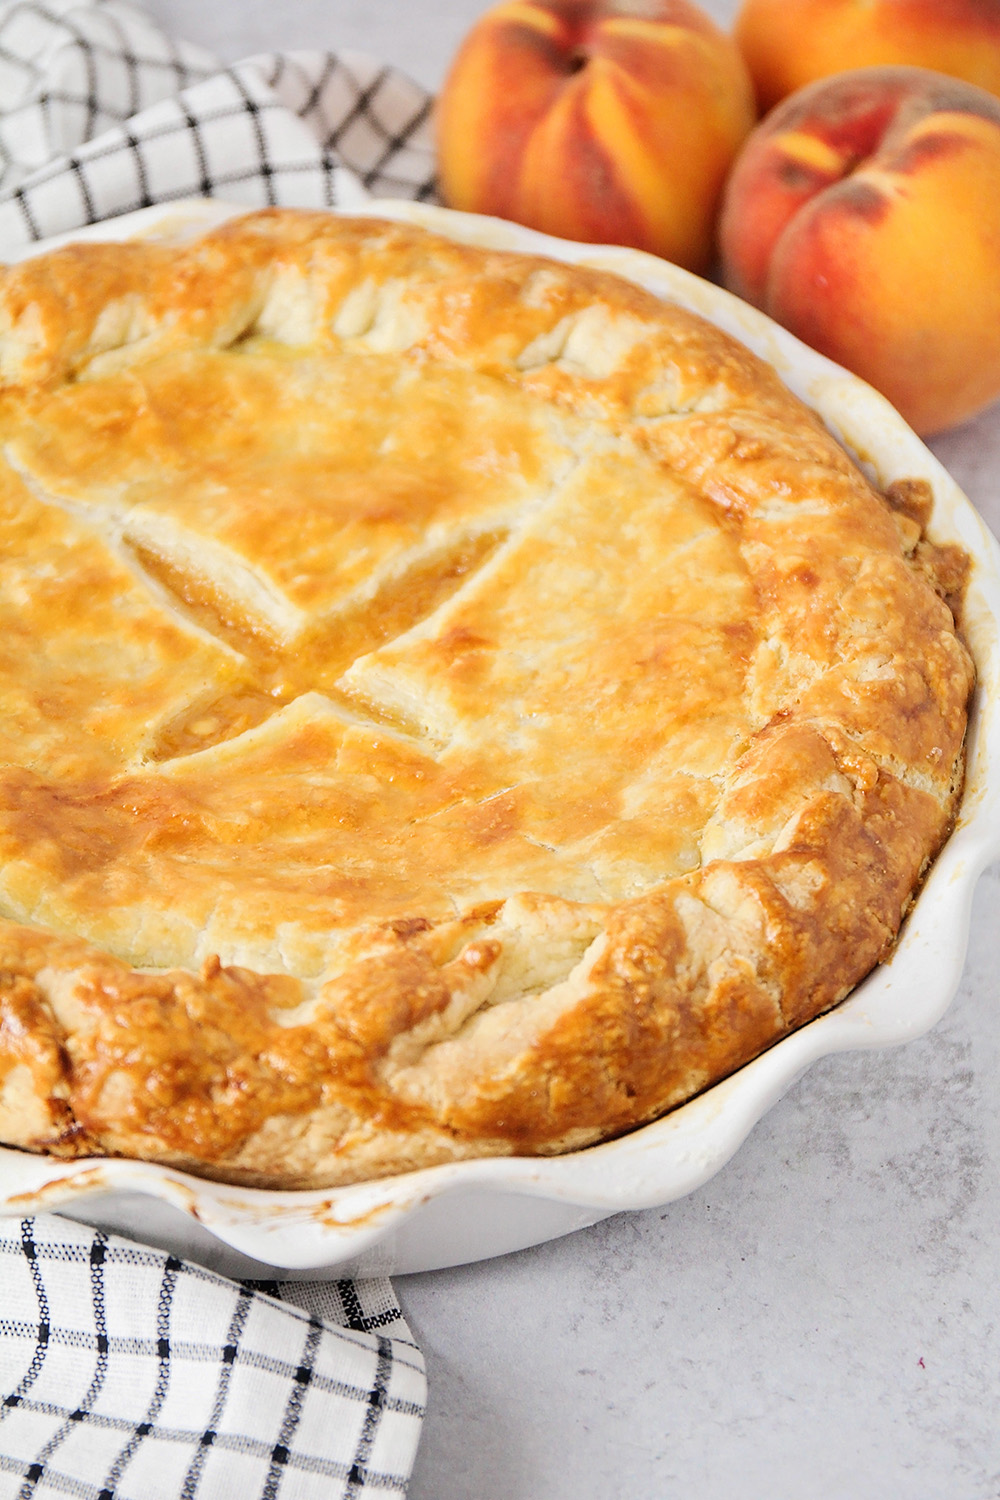 This double crust peach pie is everything you could want in a pie! It's perfectly sweetened, with juicy fruit and a rich and buttery crust.